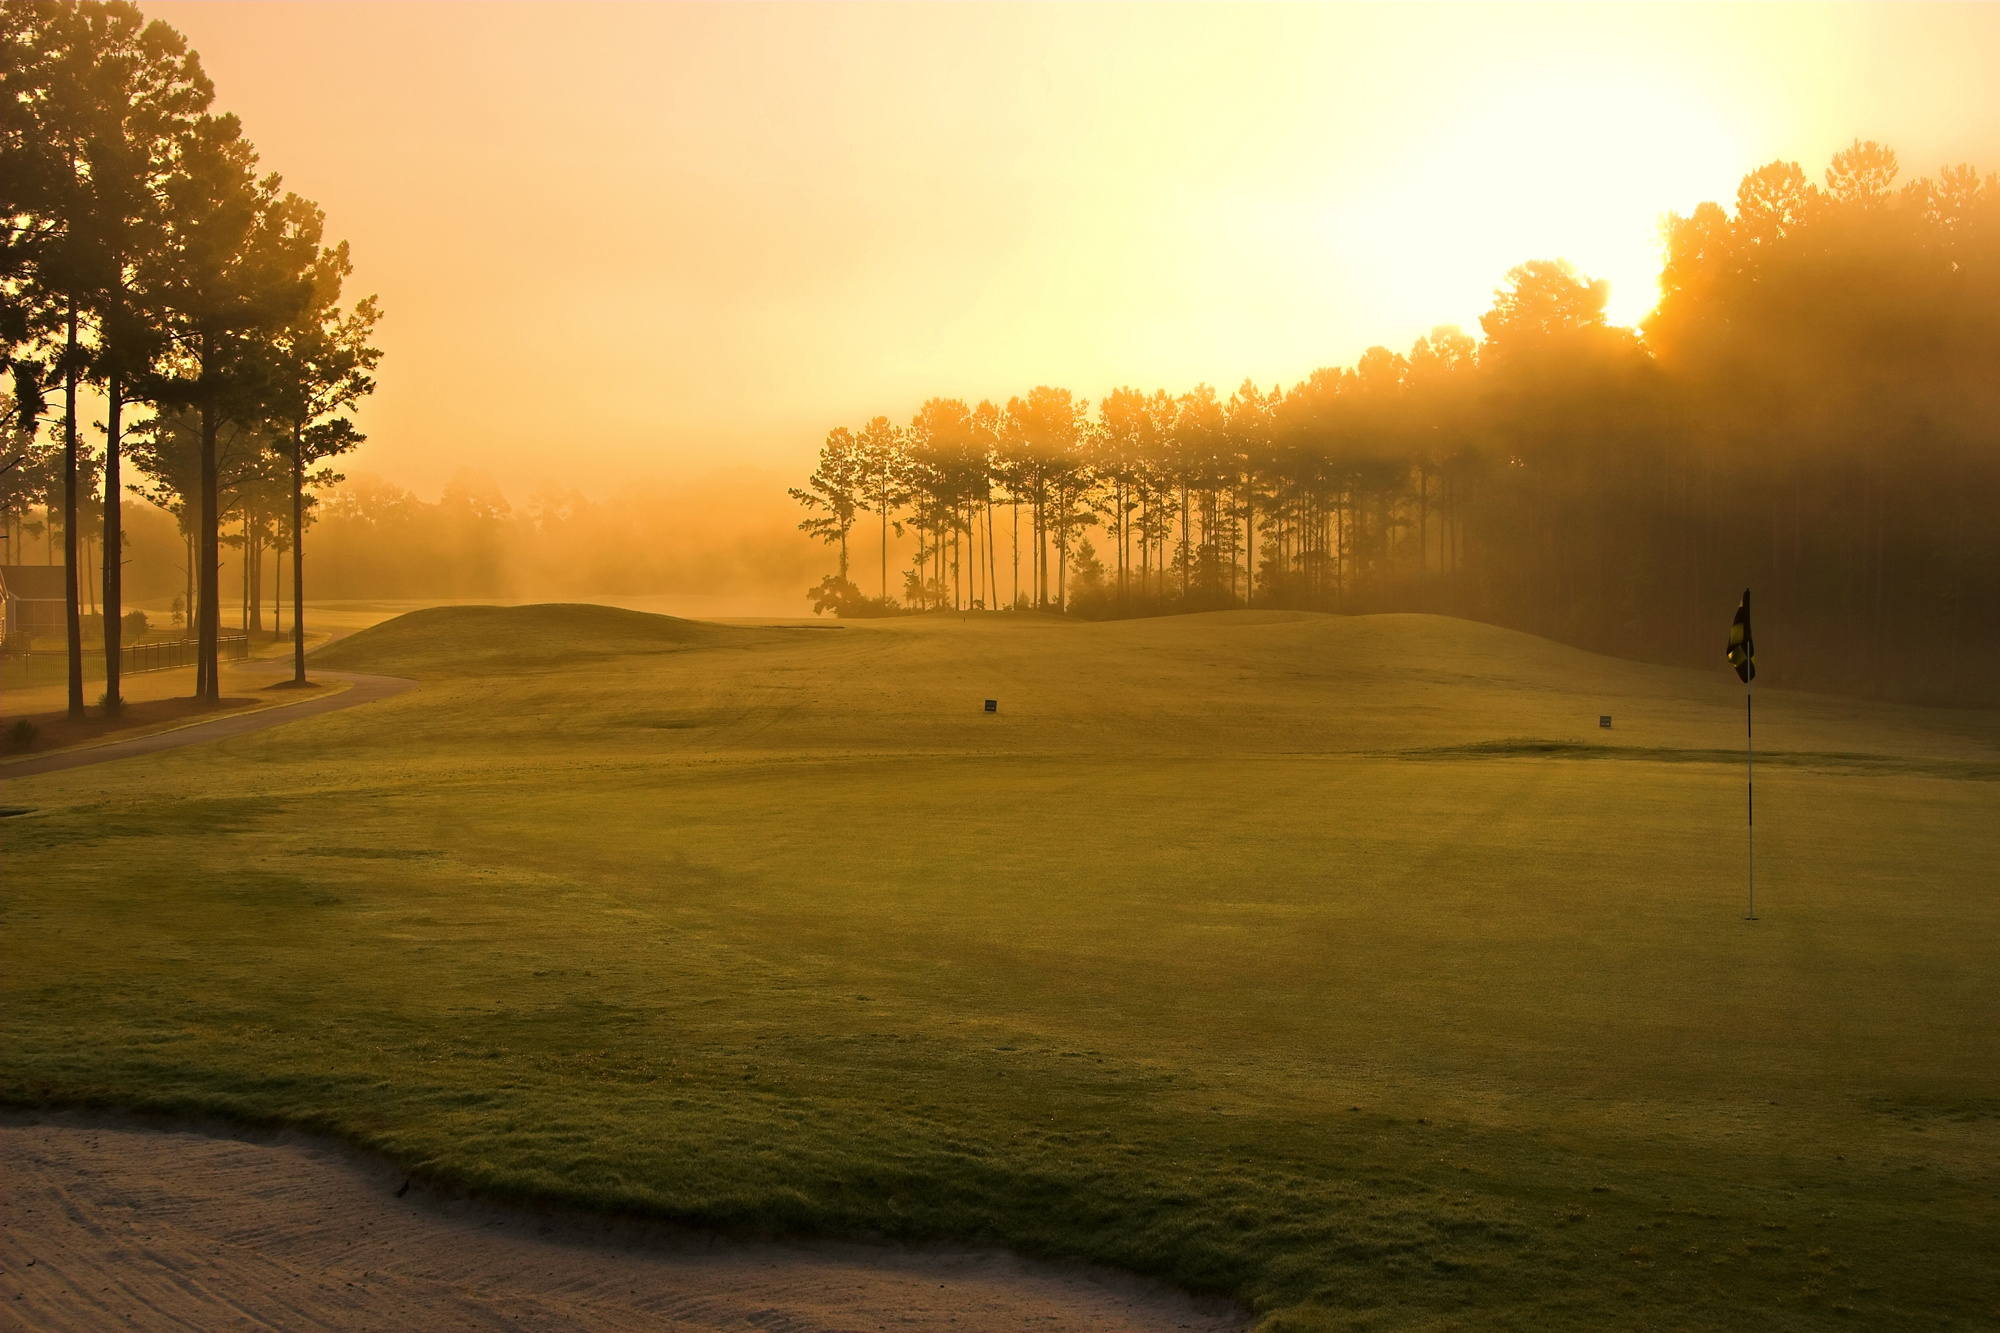 Golf Course: A standard field with 18 holes, Flagstick, Fogy, Rye grass, Teeing ground. 2000x1340 HD Background.